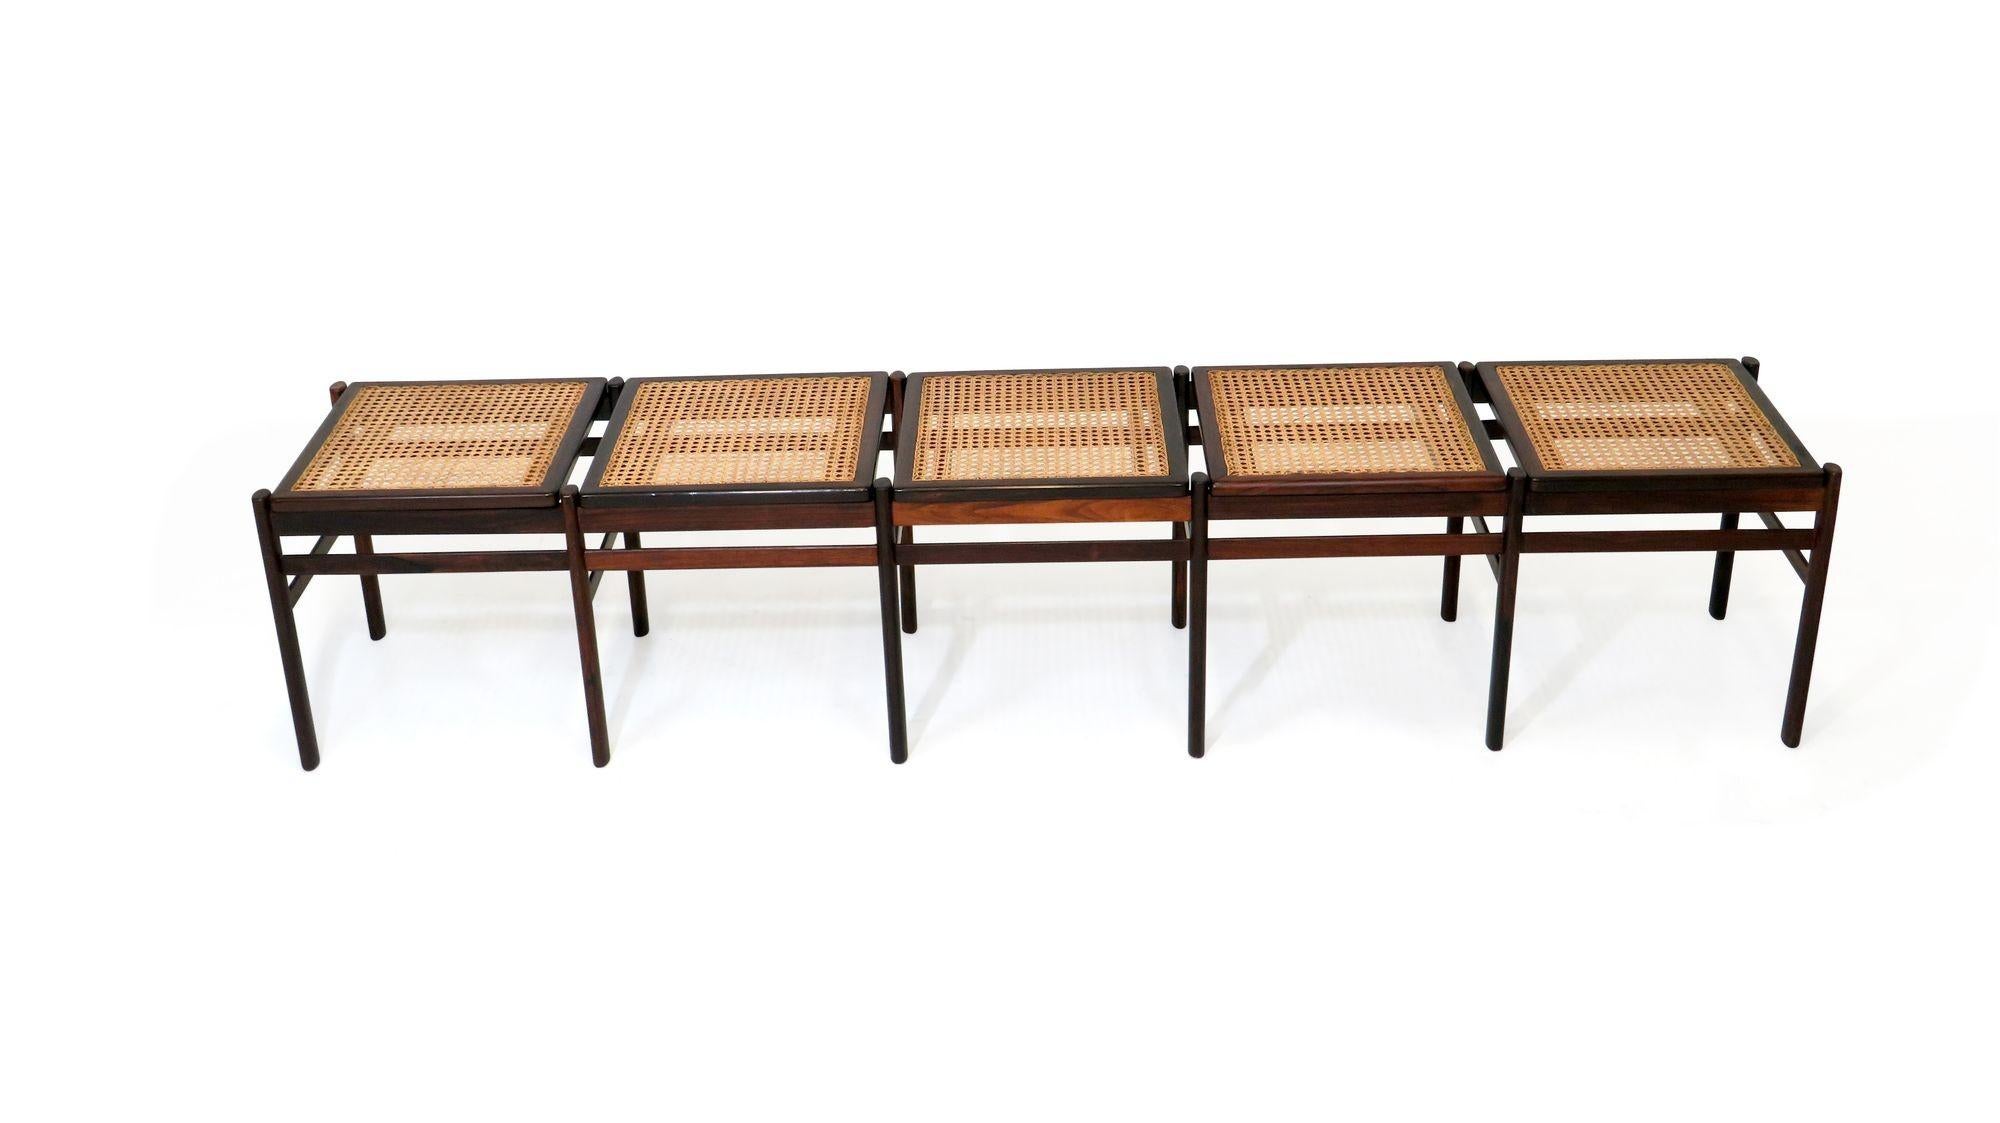 Bench crafted of dark figured solid Brazilian rosewood and hand woven cane in manner of Joaquim Tenreiro.

Bench is in excellent condition with minor signs of age and use.

Measurements 
W 84.25'' x D 16.75'' x H 17''.